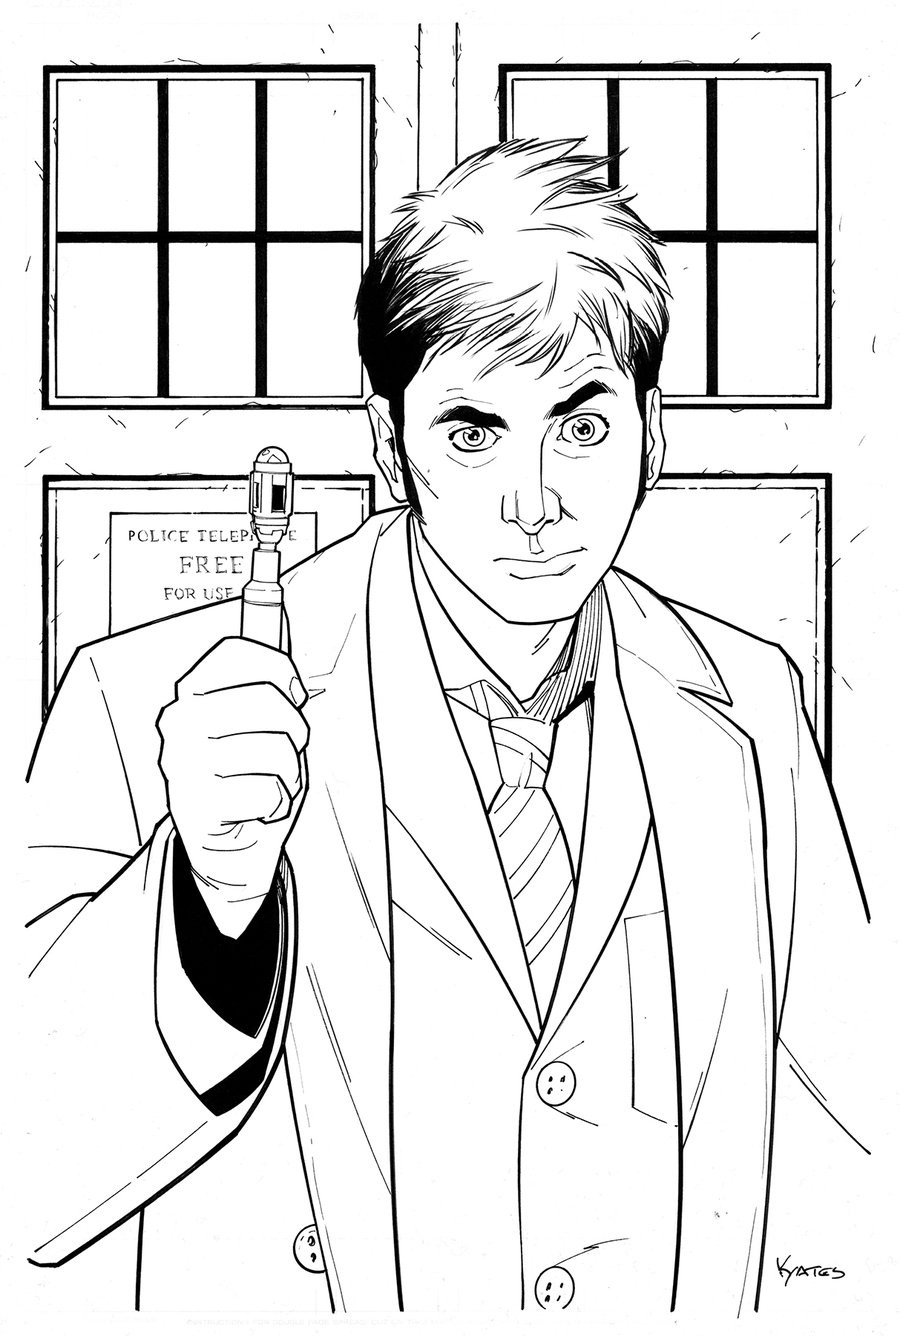 Doctor Who Coloring Pages
 10th Doctor Who by KellyYates on DeviantArt